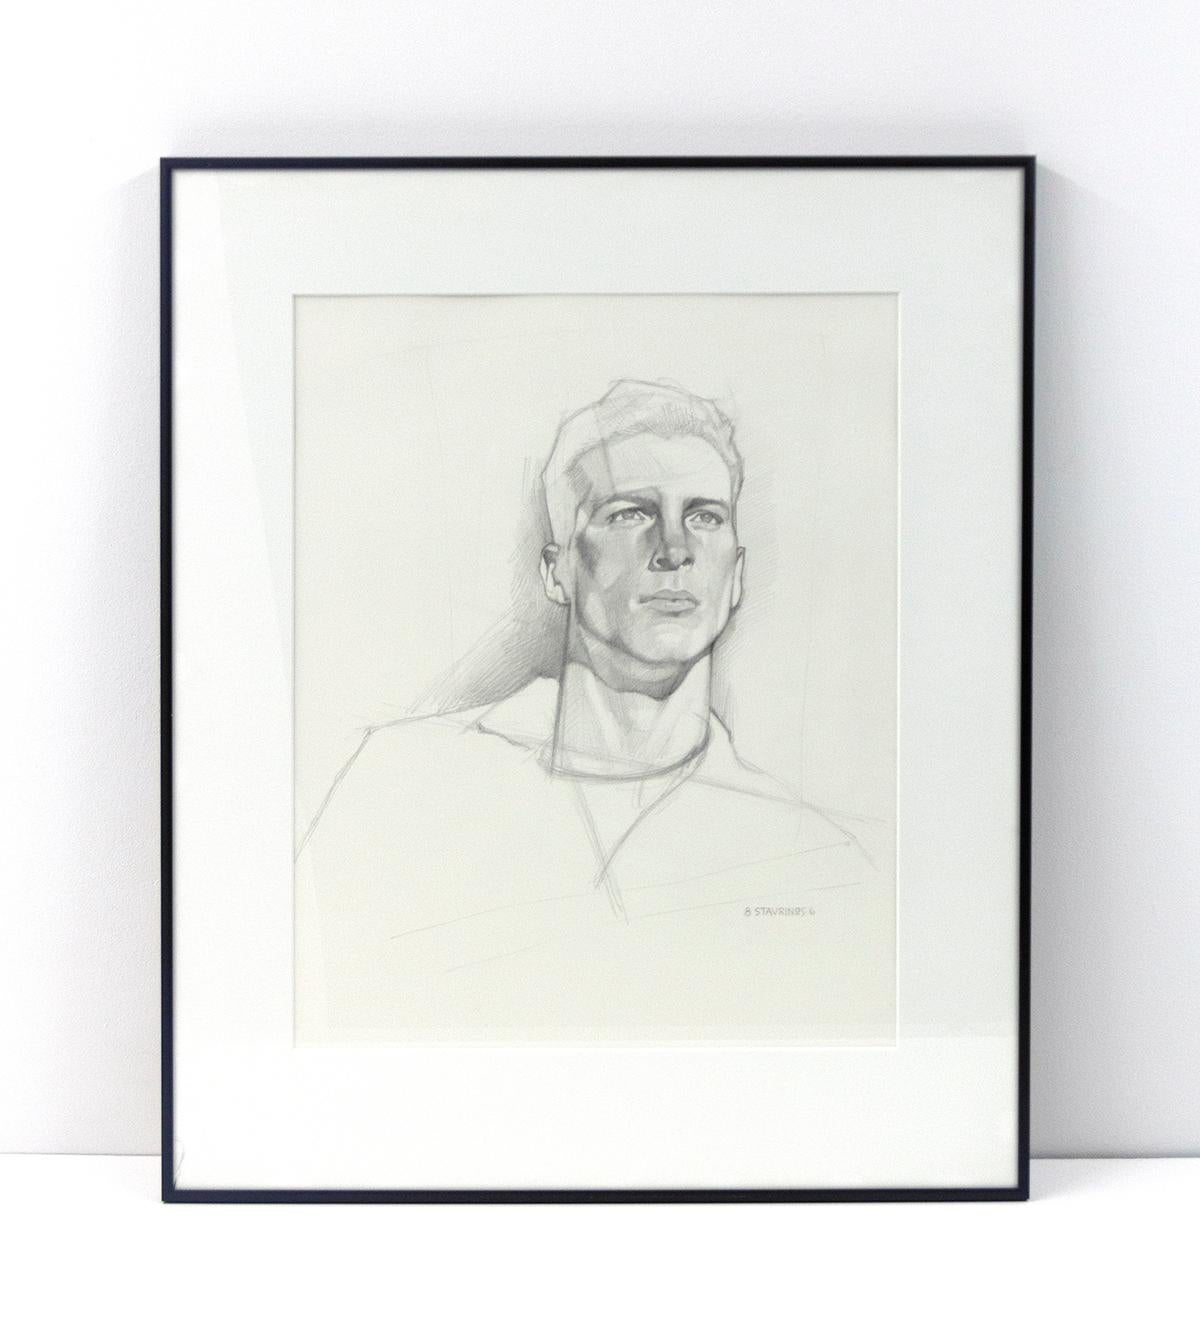 Untitled (Black-and-White Graphite Portrait of a Man Looking into the Distance) - Art by George Stavrinos